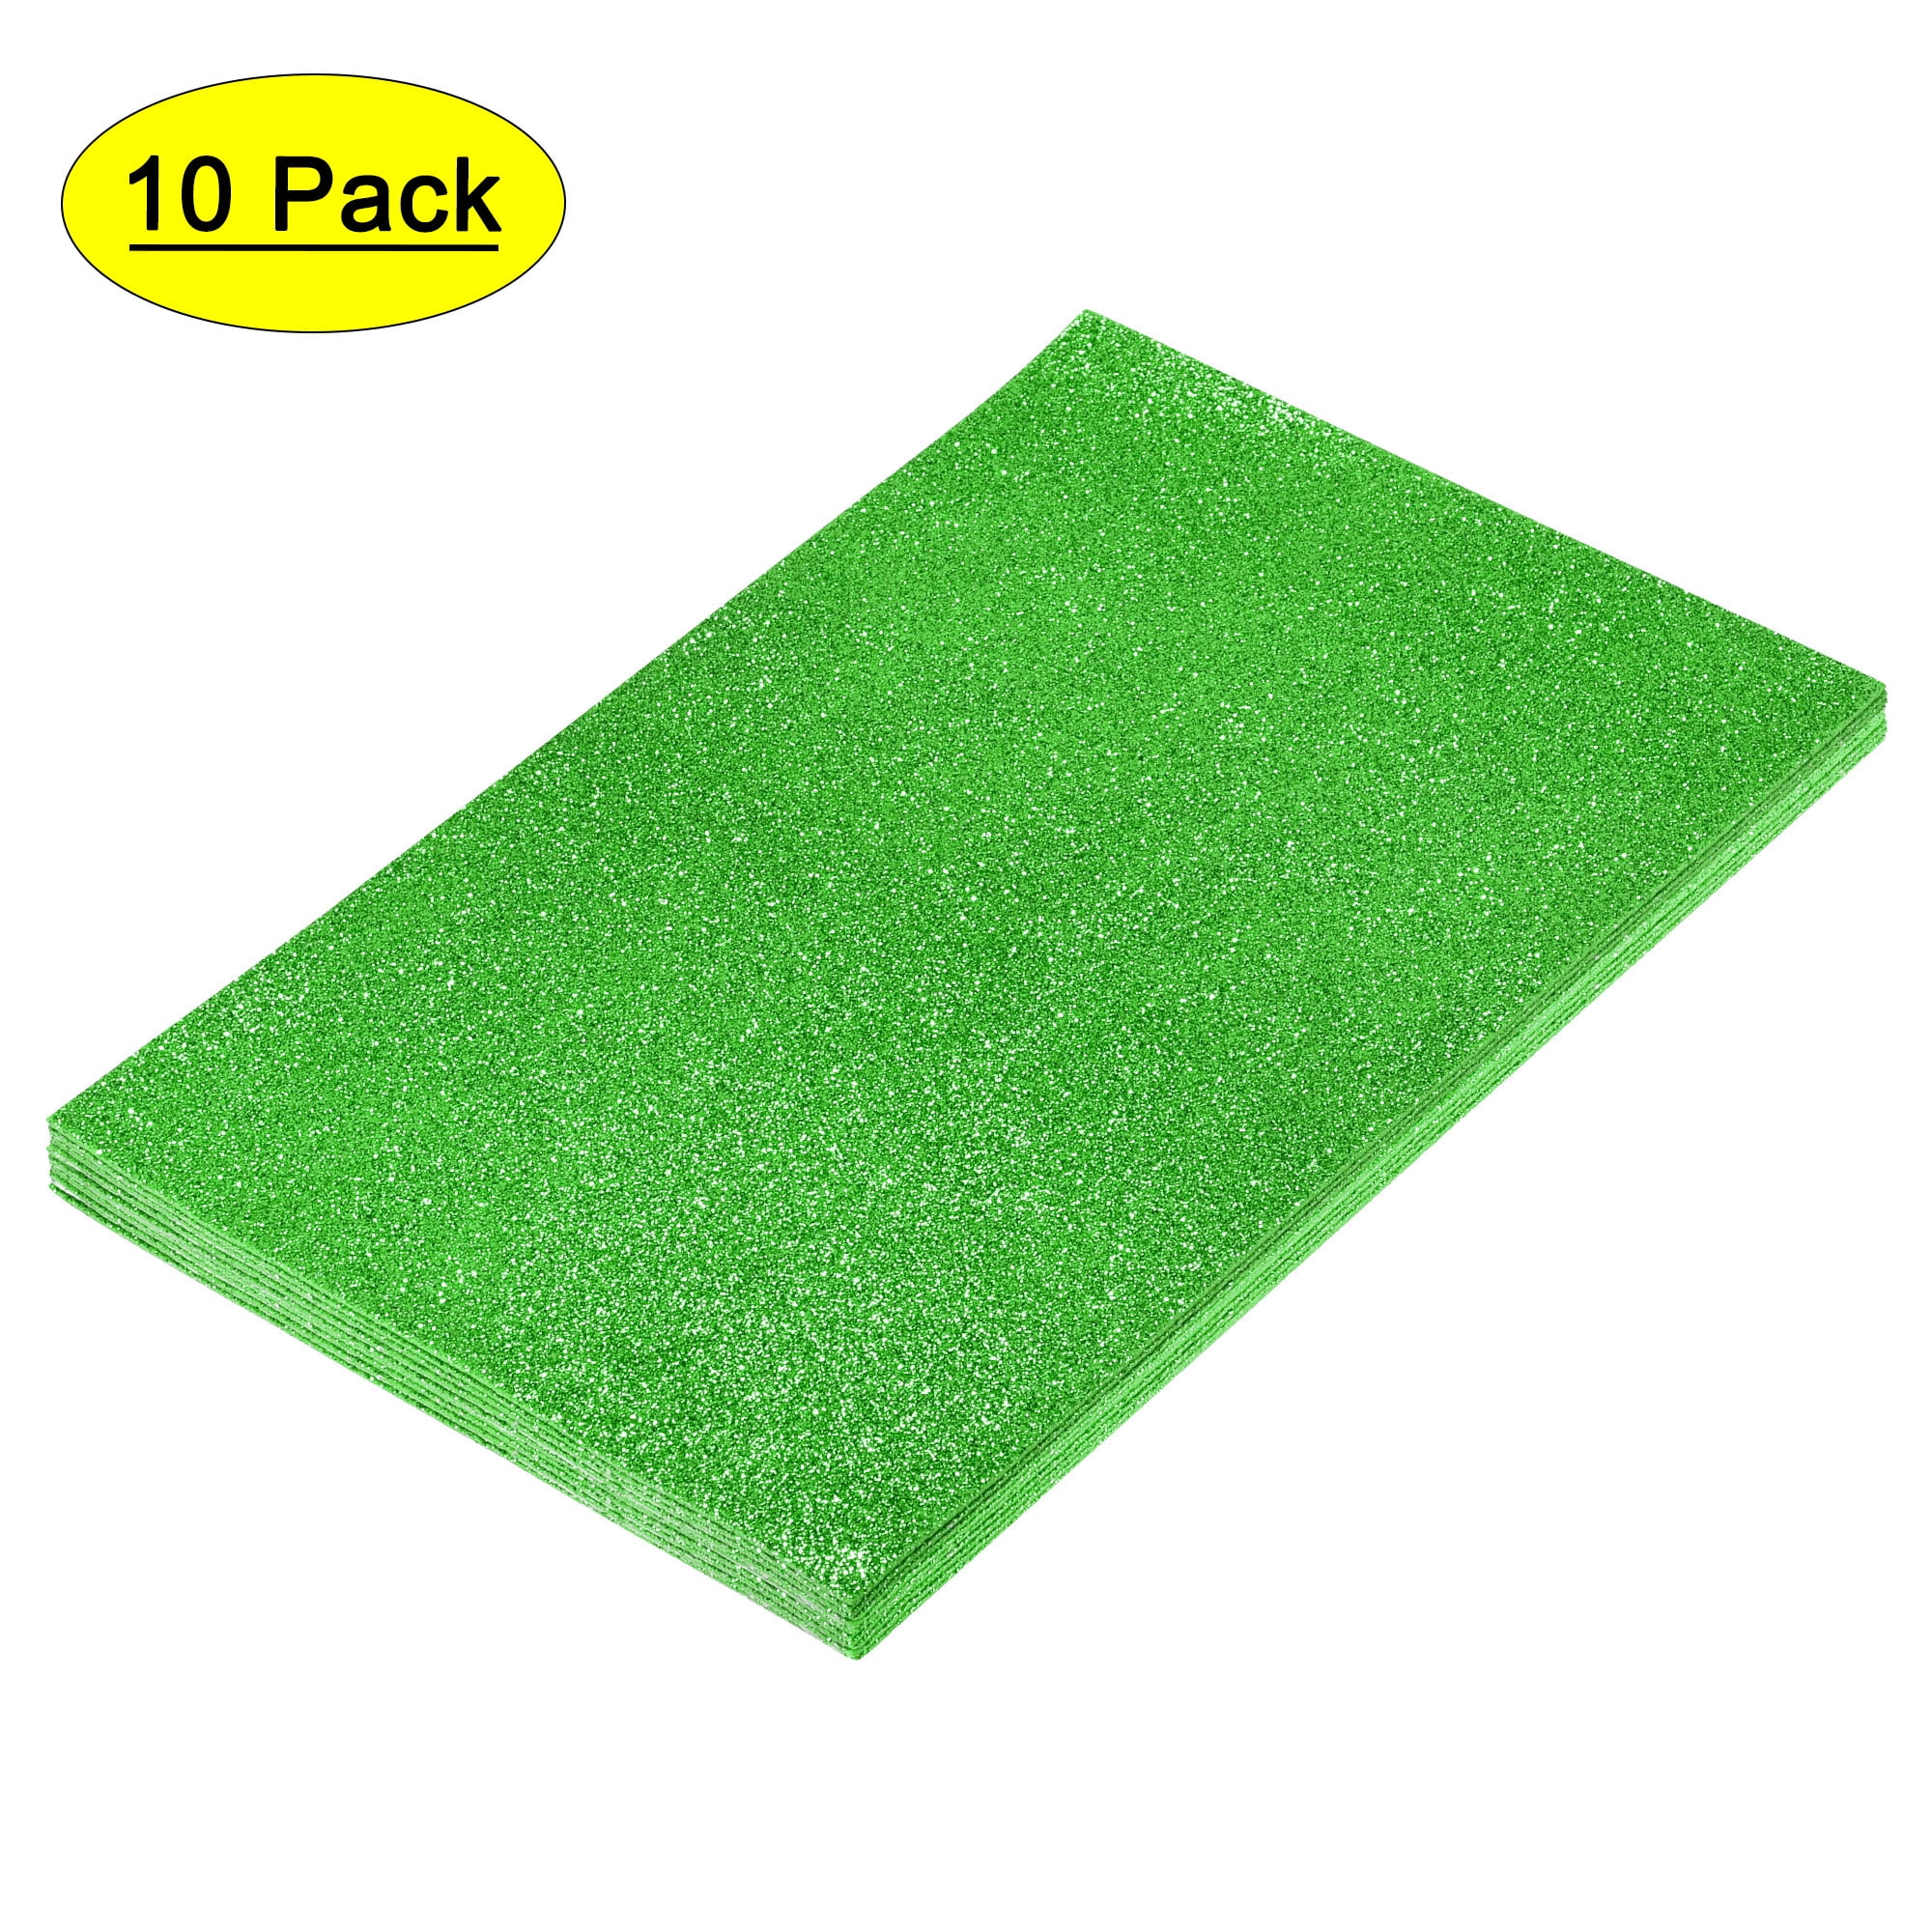 36 Pack Glitter Foam Sheets 9 x 12 Inch by Better Office Products Assorted  12 Colors for Arts and Crafts 36 Sheets